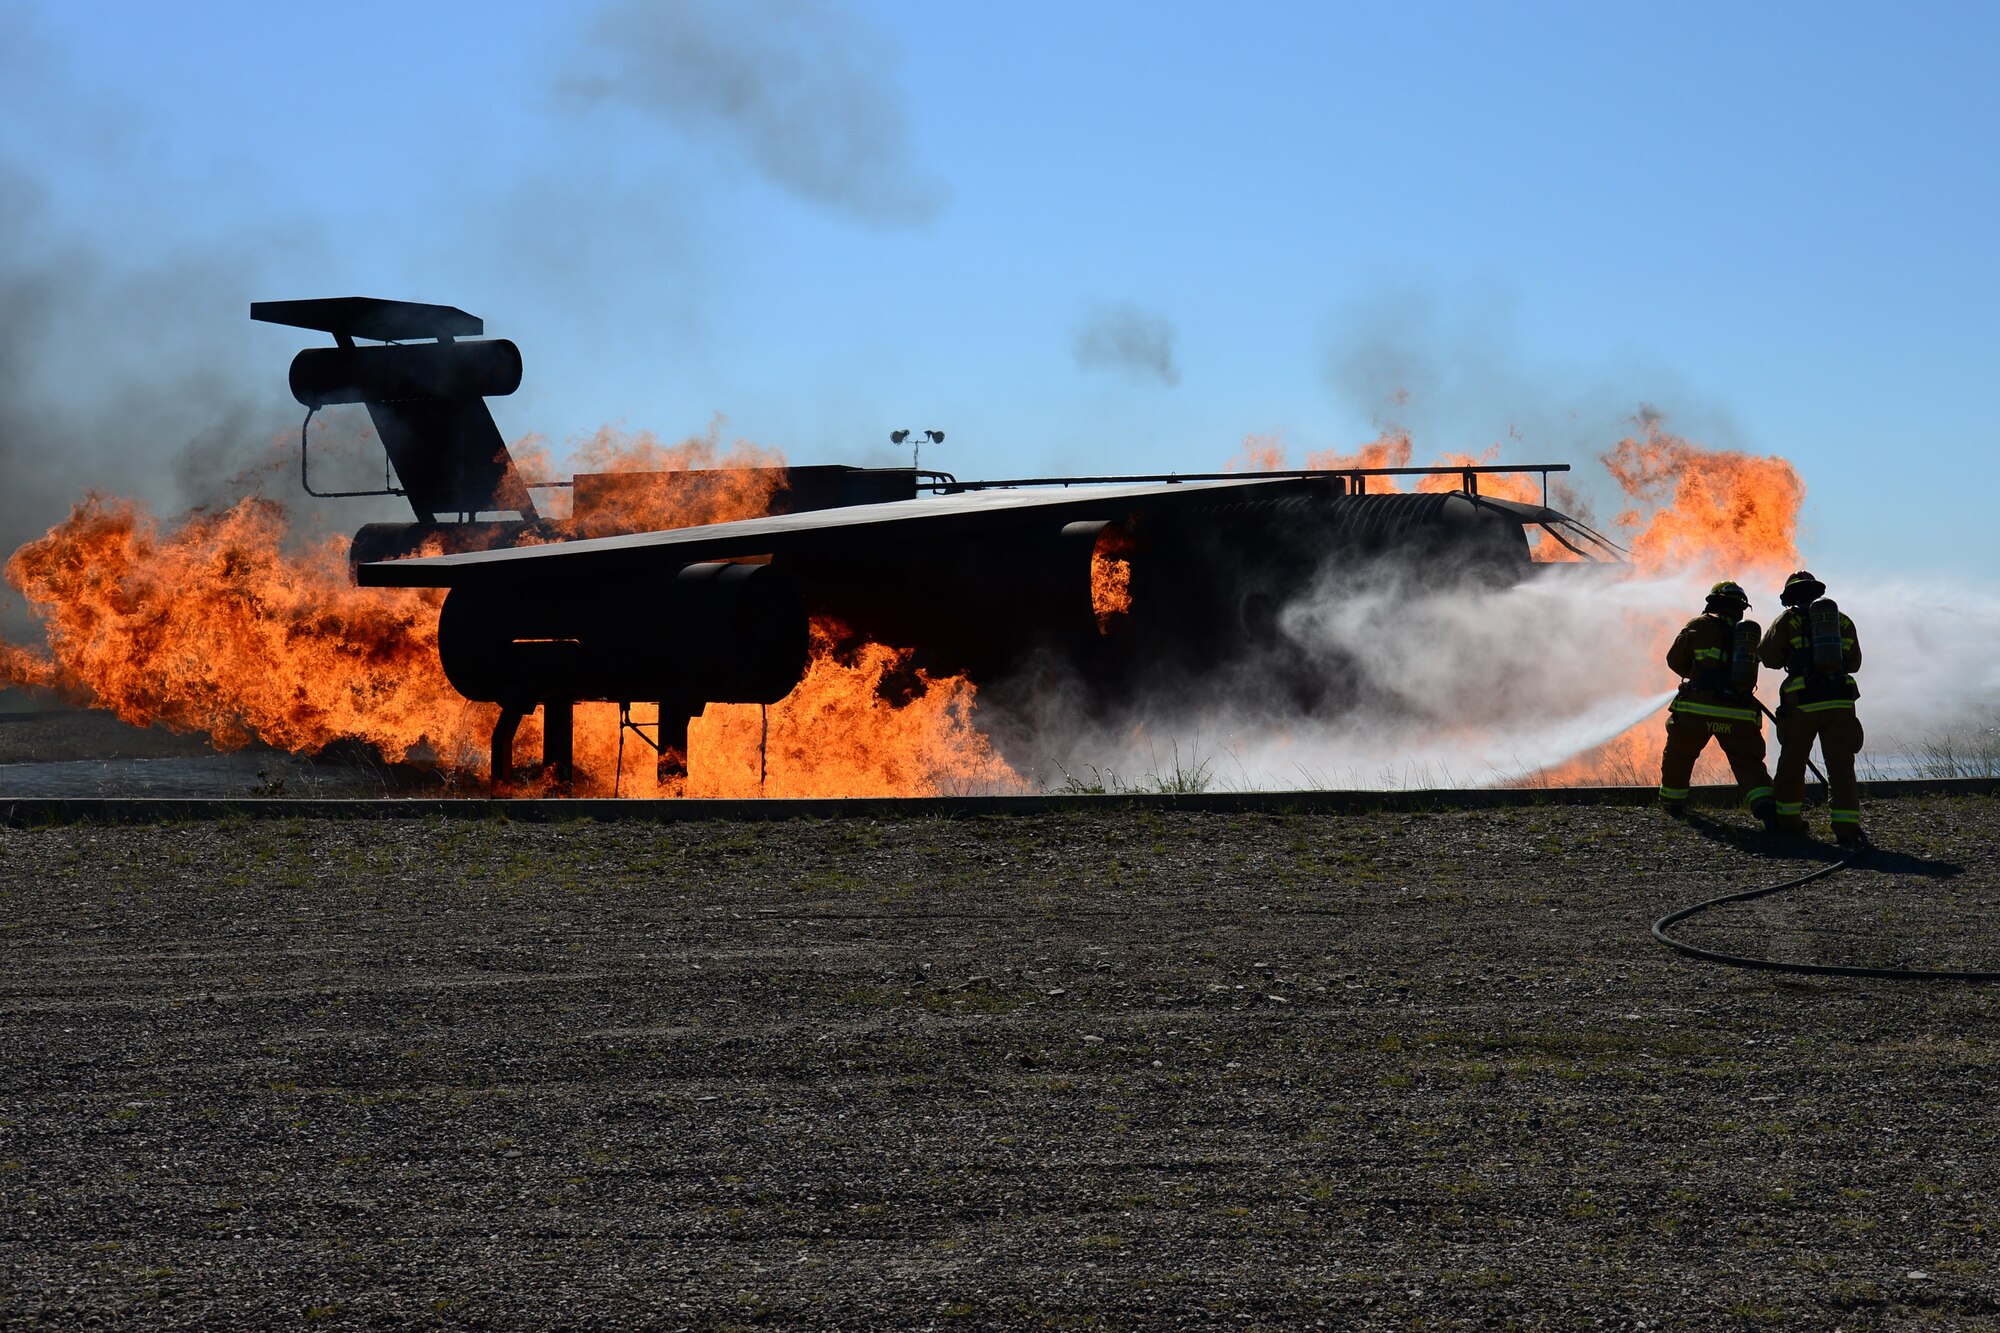 Airman 1st Class Dean York, left, and Staff Sgt. Peter Kuriwai, 341st Civil Engineer Squadron firefighters, attempt to put out a fire during an exercise July 18, 2018, at Malmstrom Air Force Base, Mont. Airmen with the 341st CES ran through aircraft fire procedures in case a disaster occurs. (U.S. Air Force photo by Airman 1st Class Tristan Truesdell)